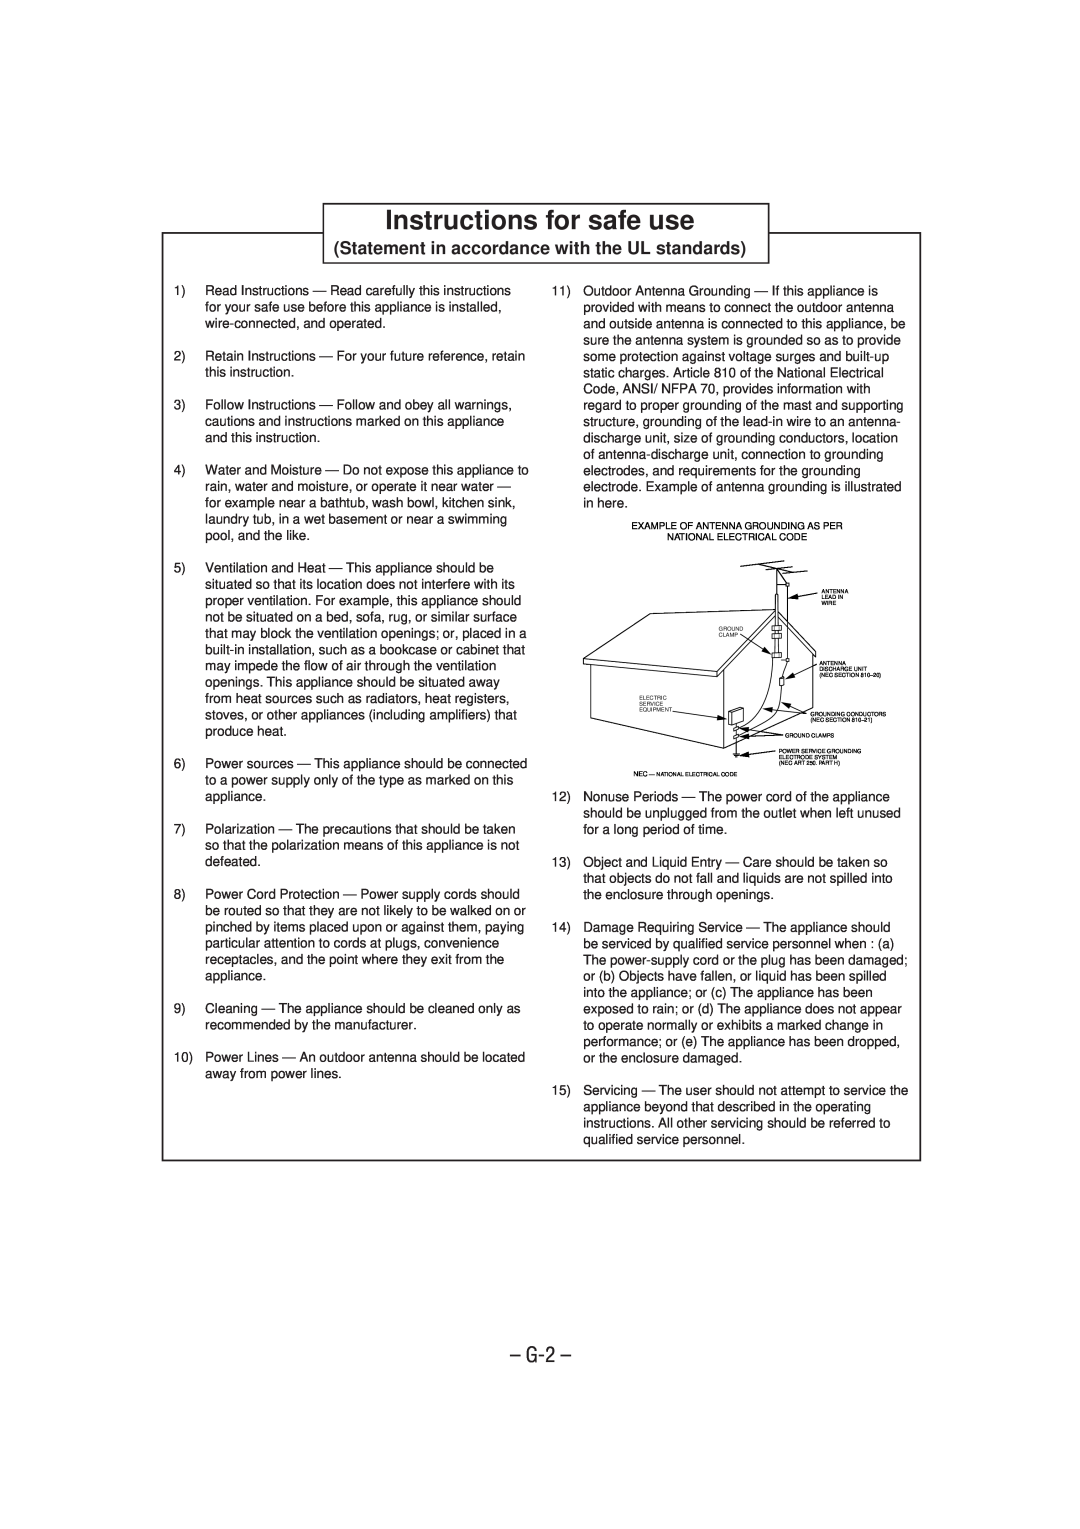 JVC MX-J900 manual Instructions for safe use, G-2, Statement in accordance with the UL standards 